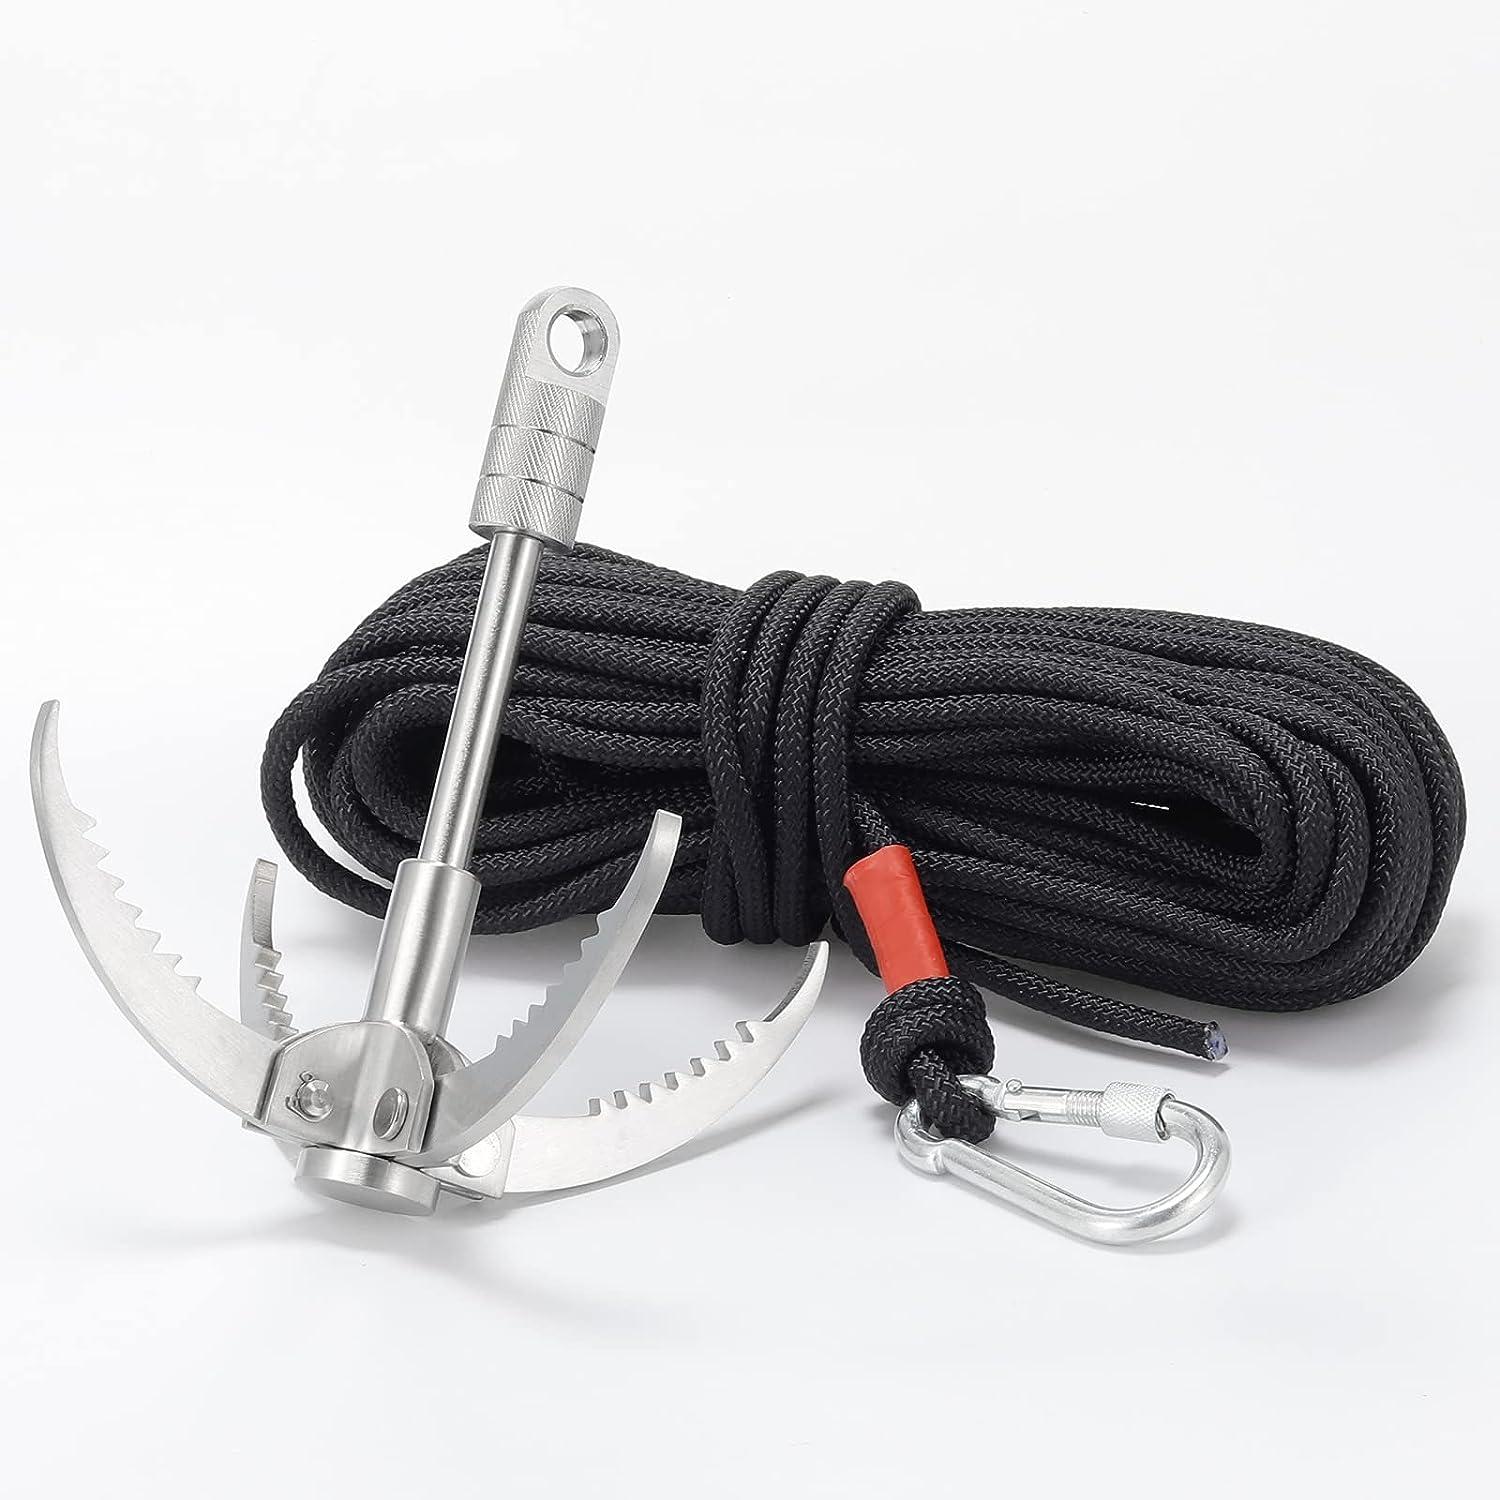 GYANDULY Large Grappling Hook with 65ft Rope, 4-Claw Folding